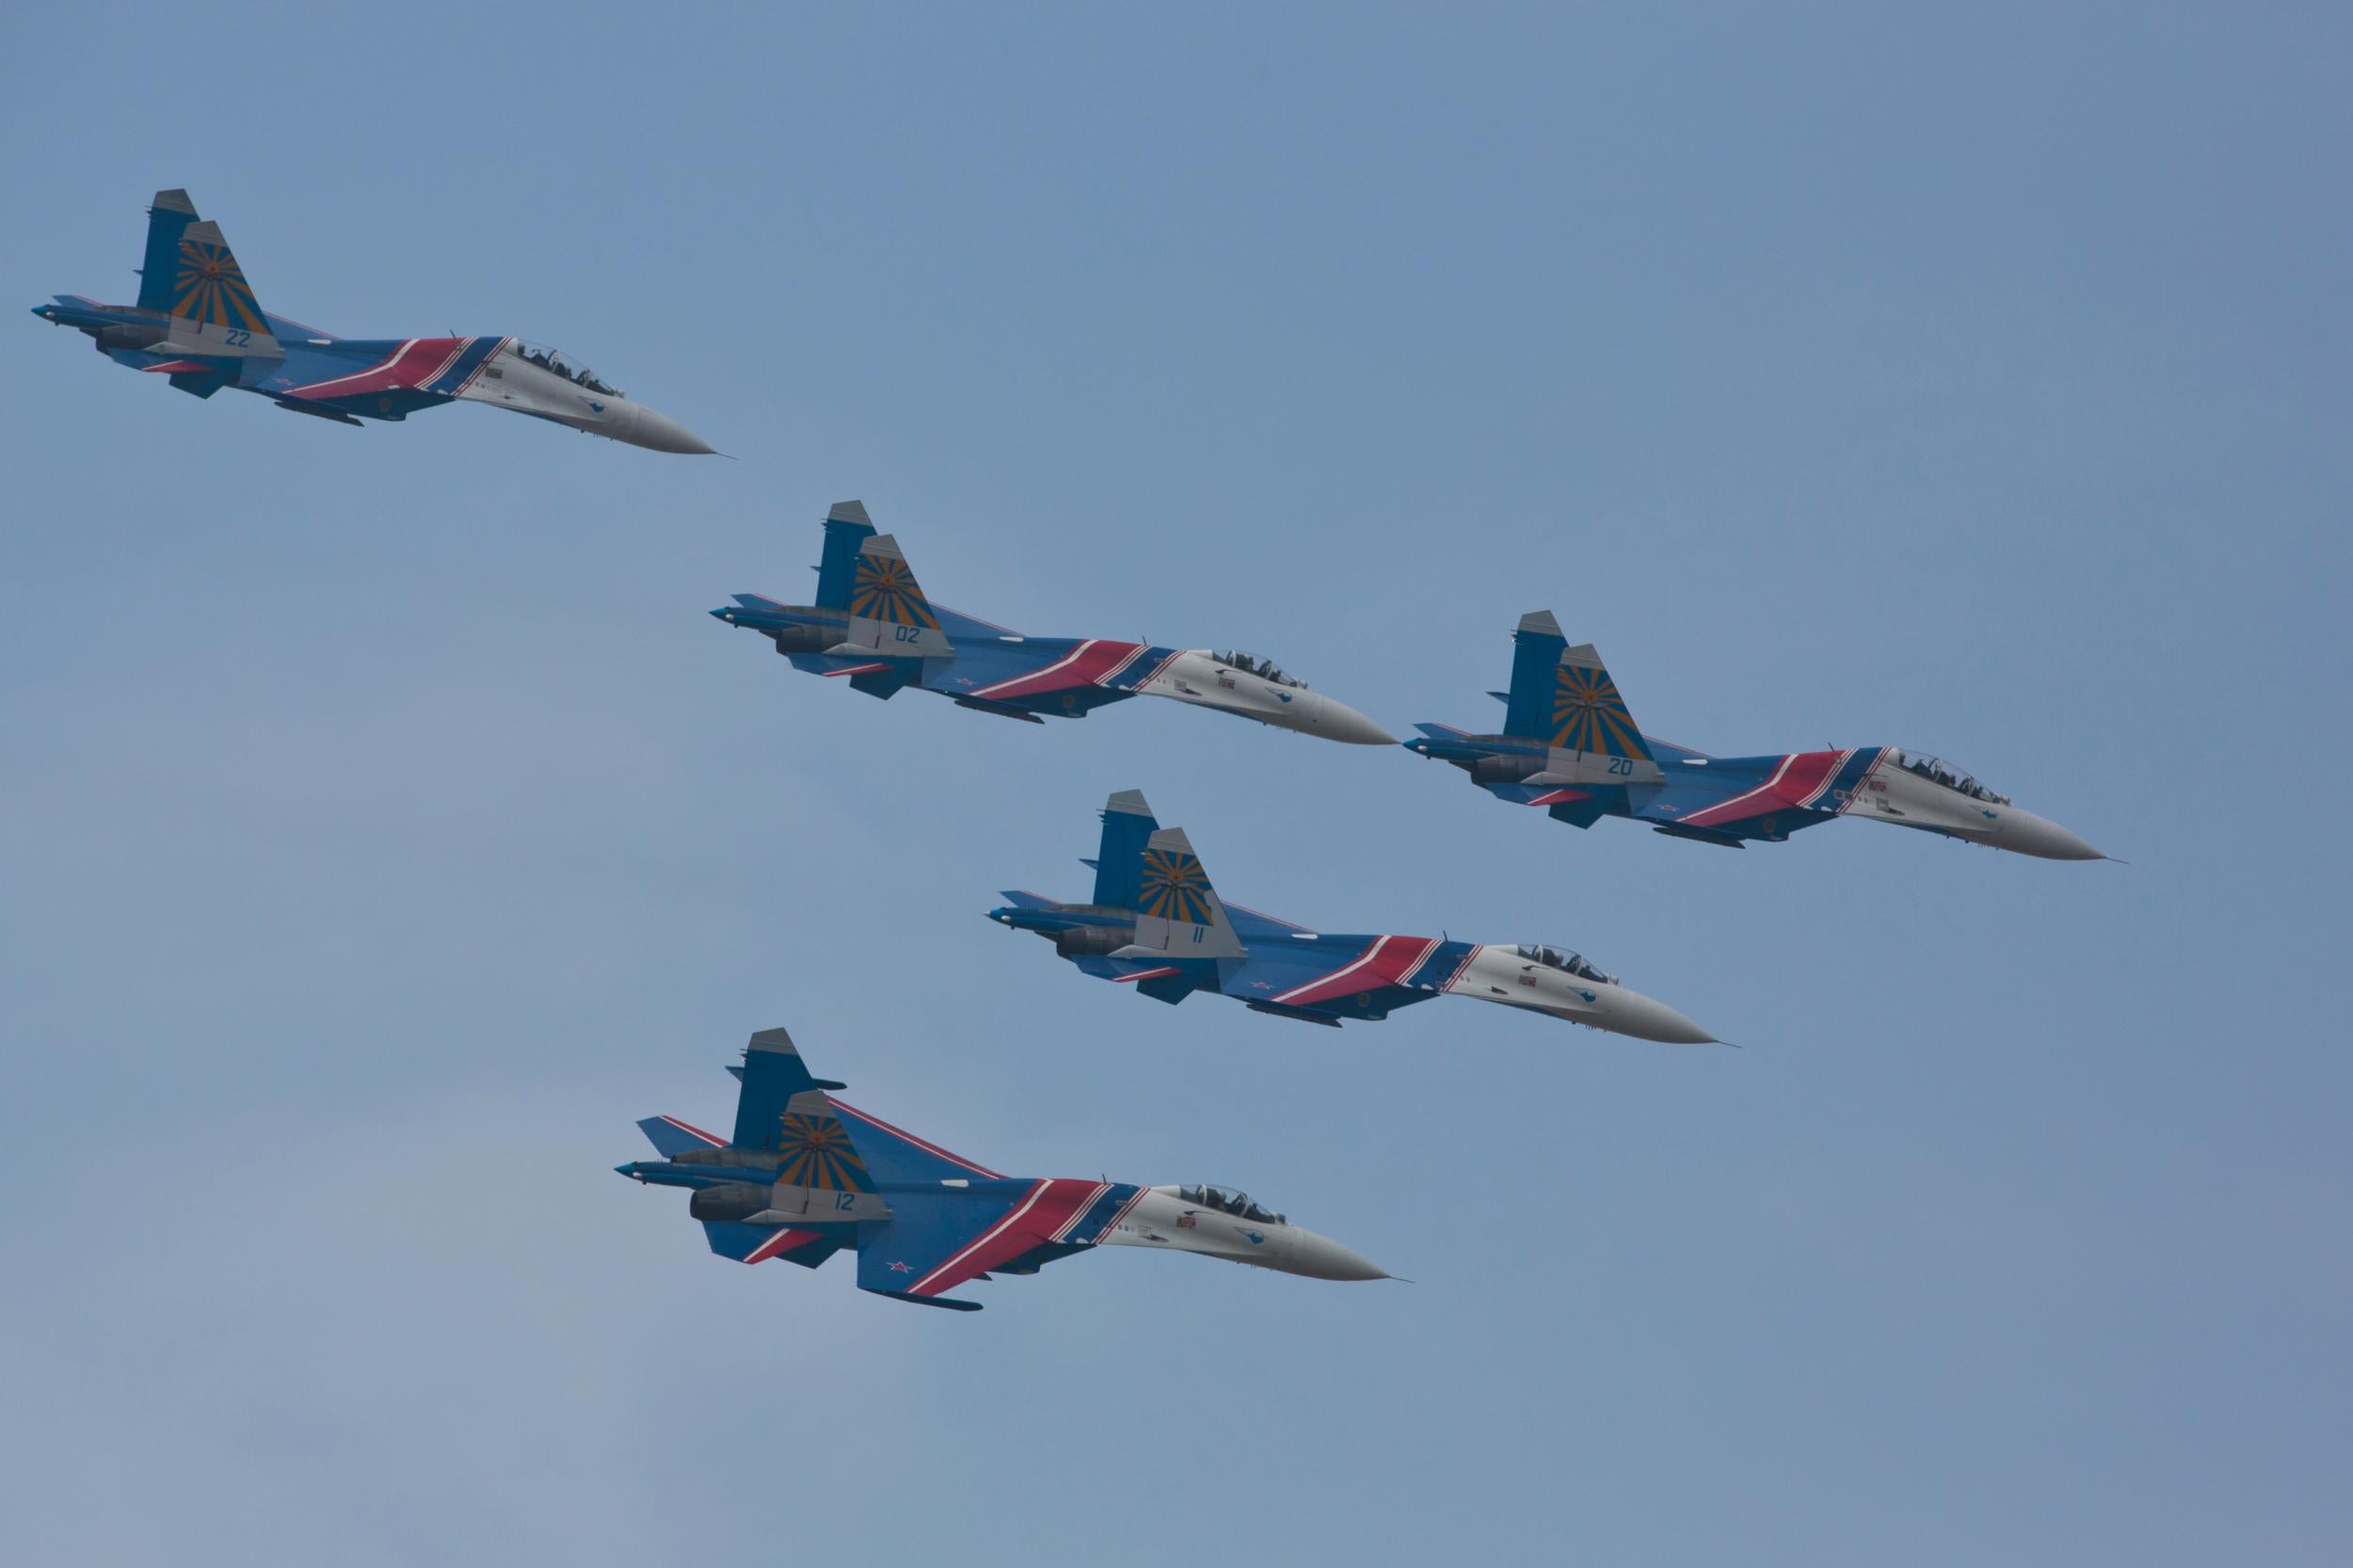 Su-27 jets of the Russian Airforce 'Knigths' Aerobatic team performs air show